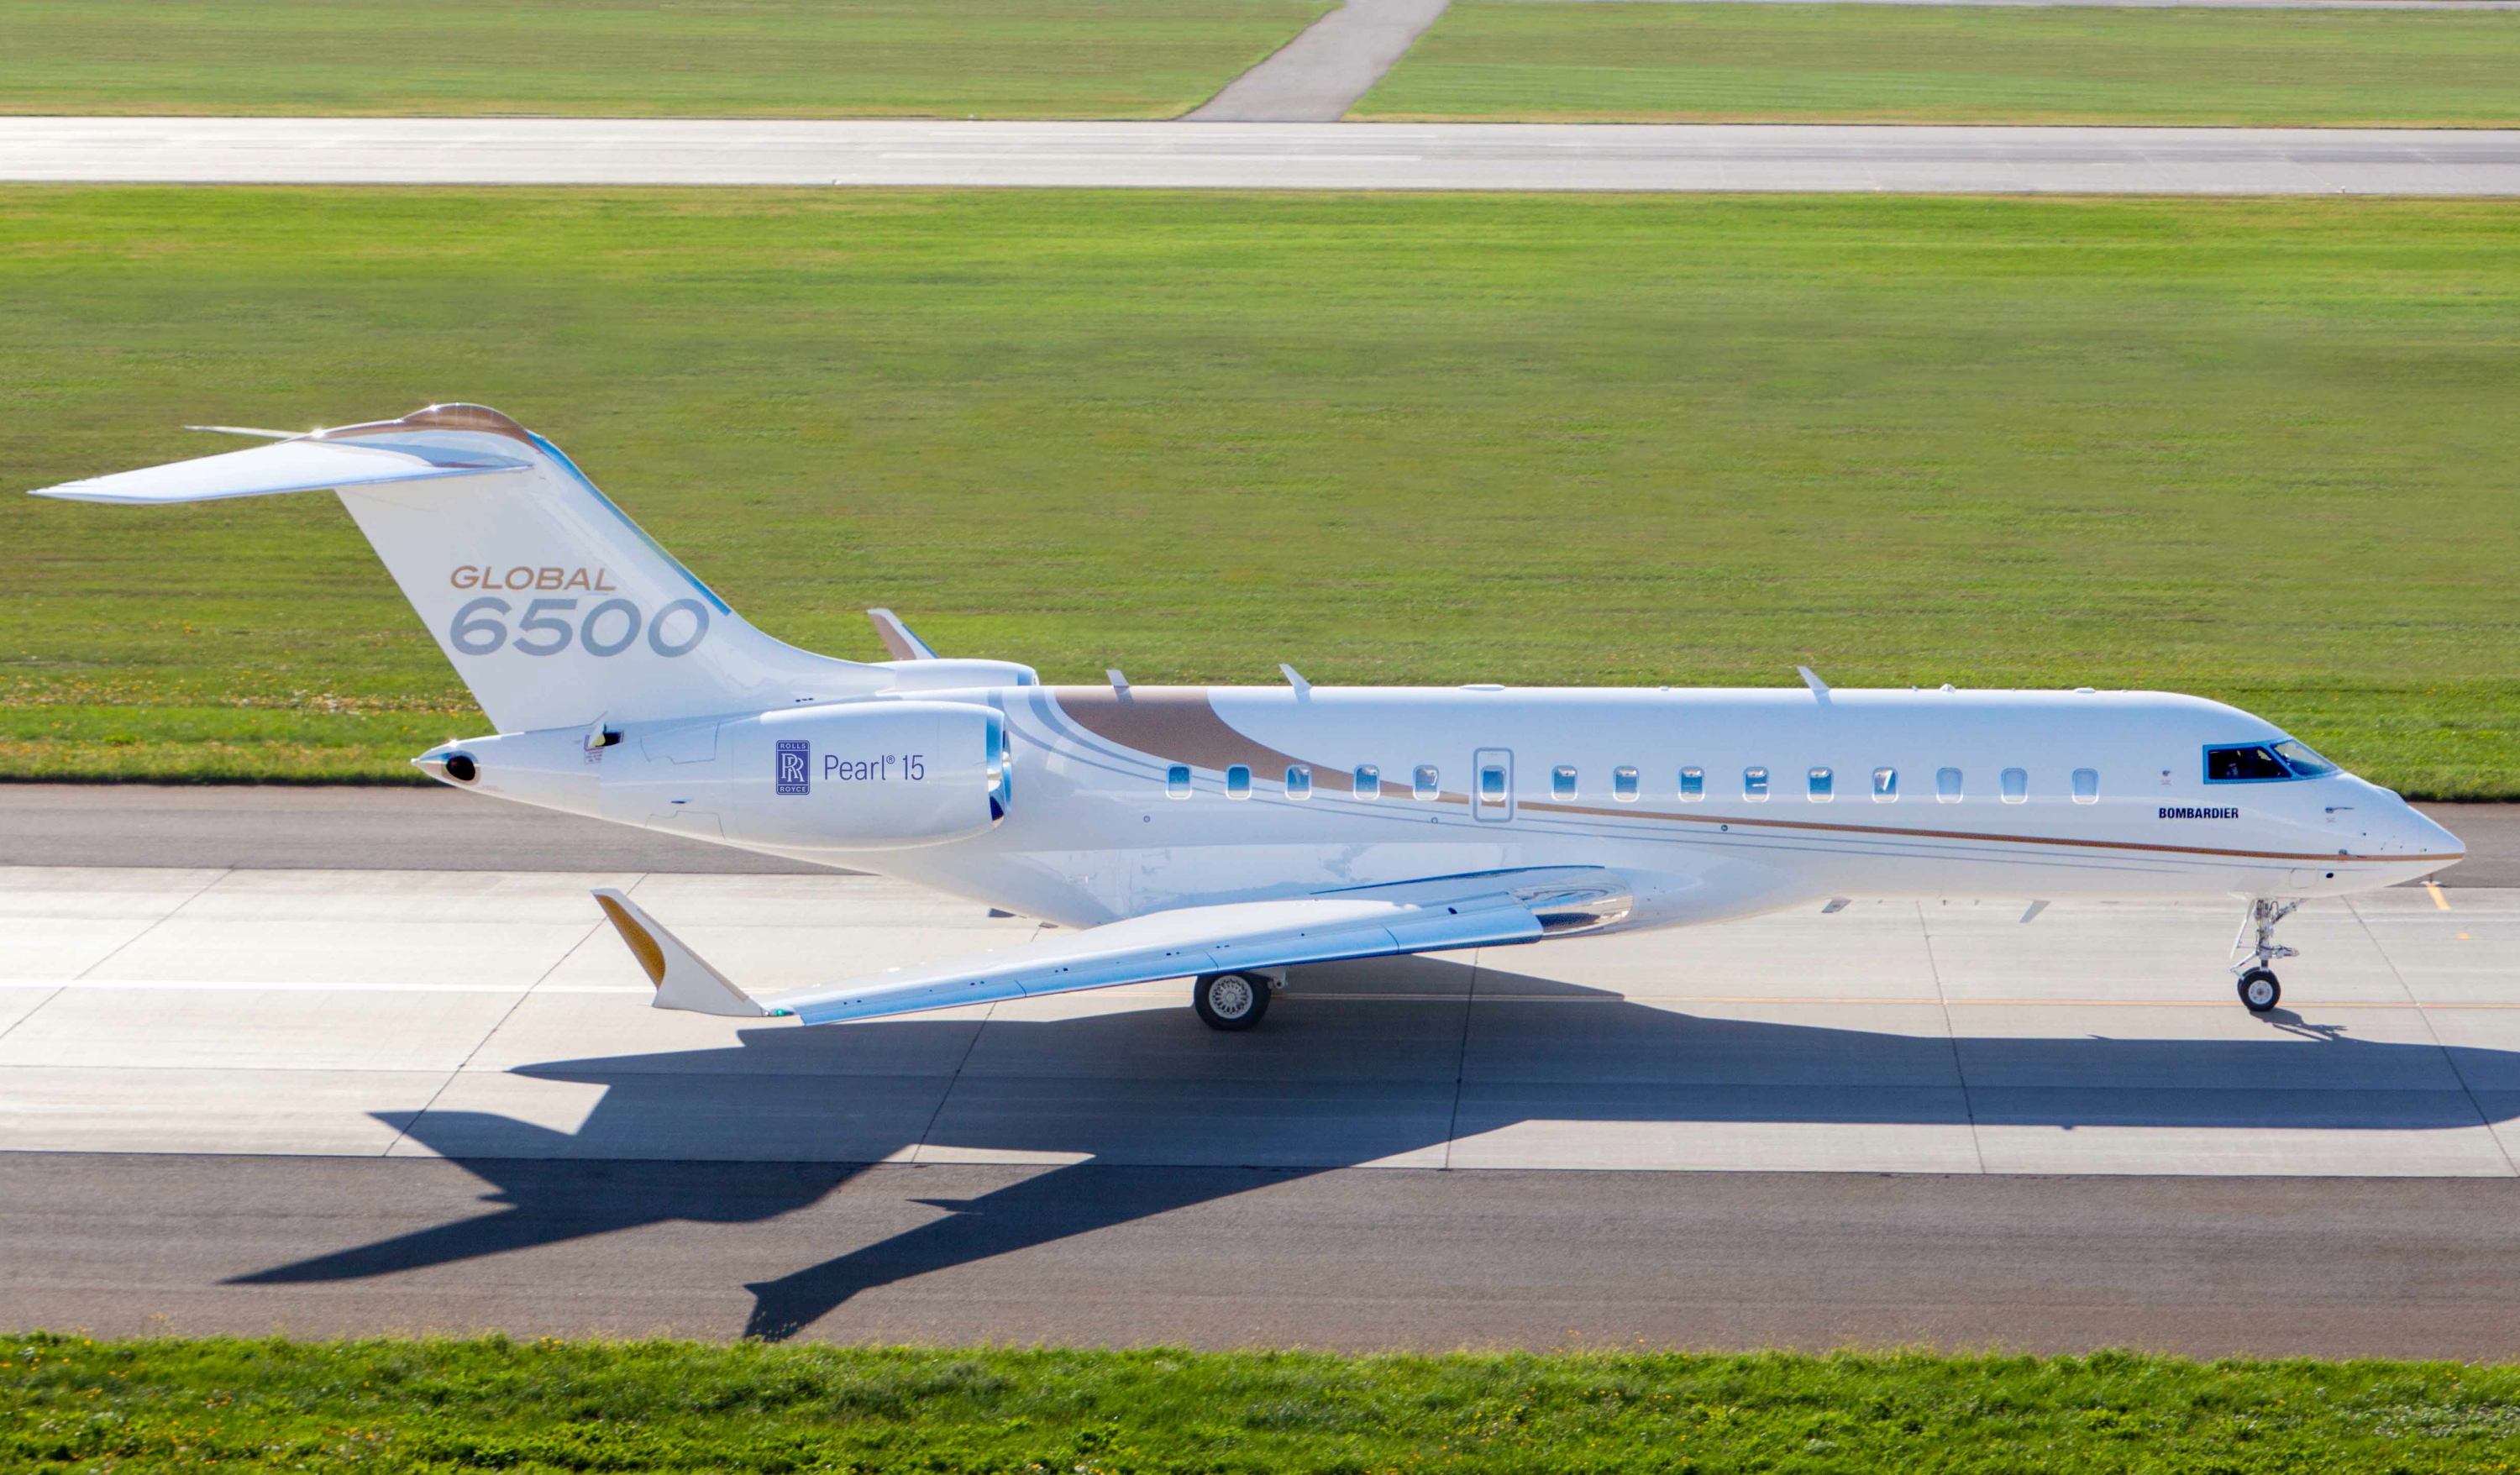 Bombardier's Global 6500 is powered by all-new Rolls-Royce Pearl 15 engines. Click to enlarge.